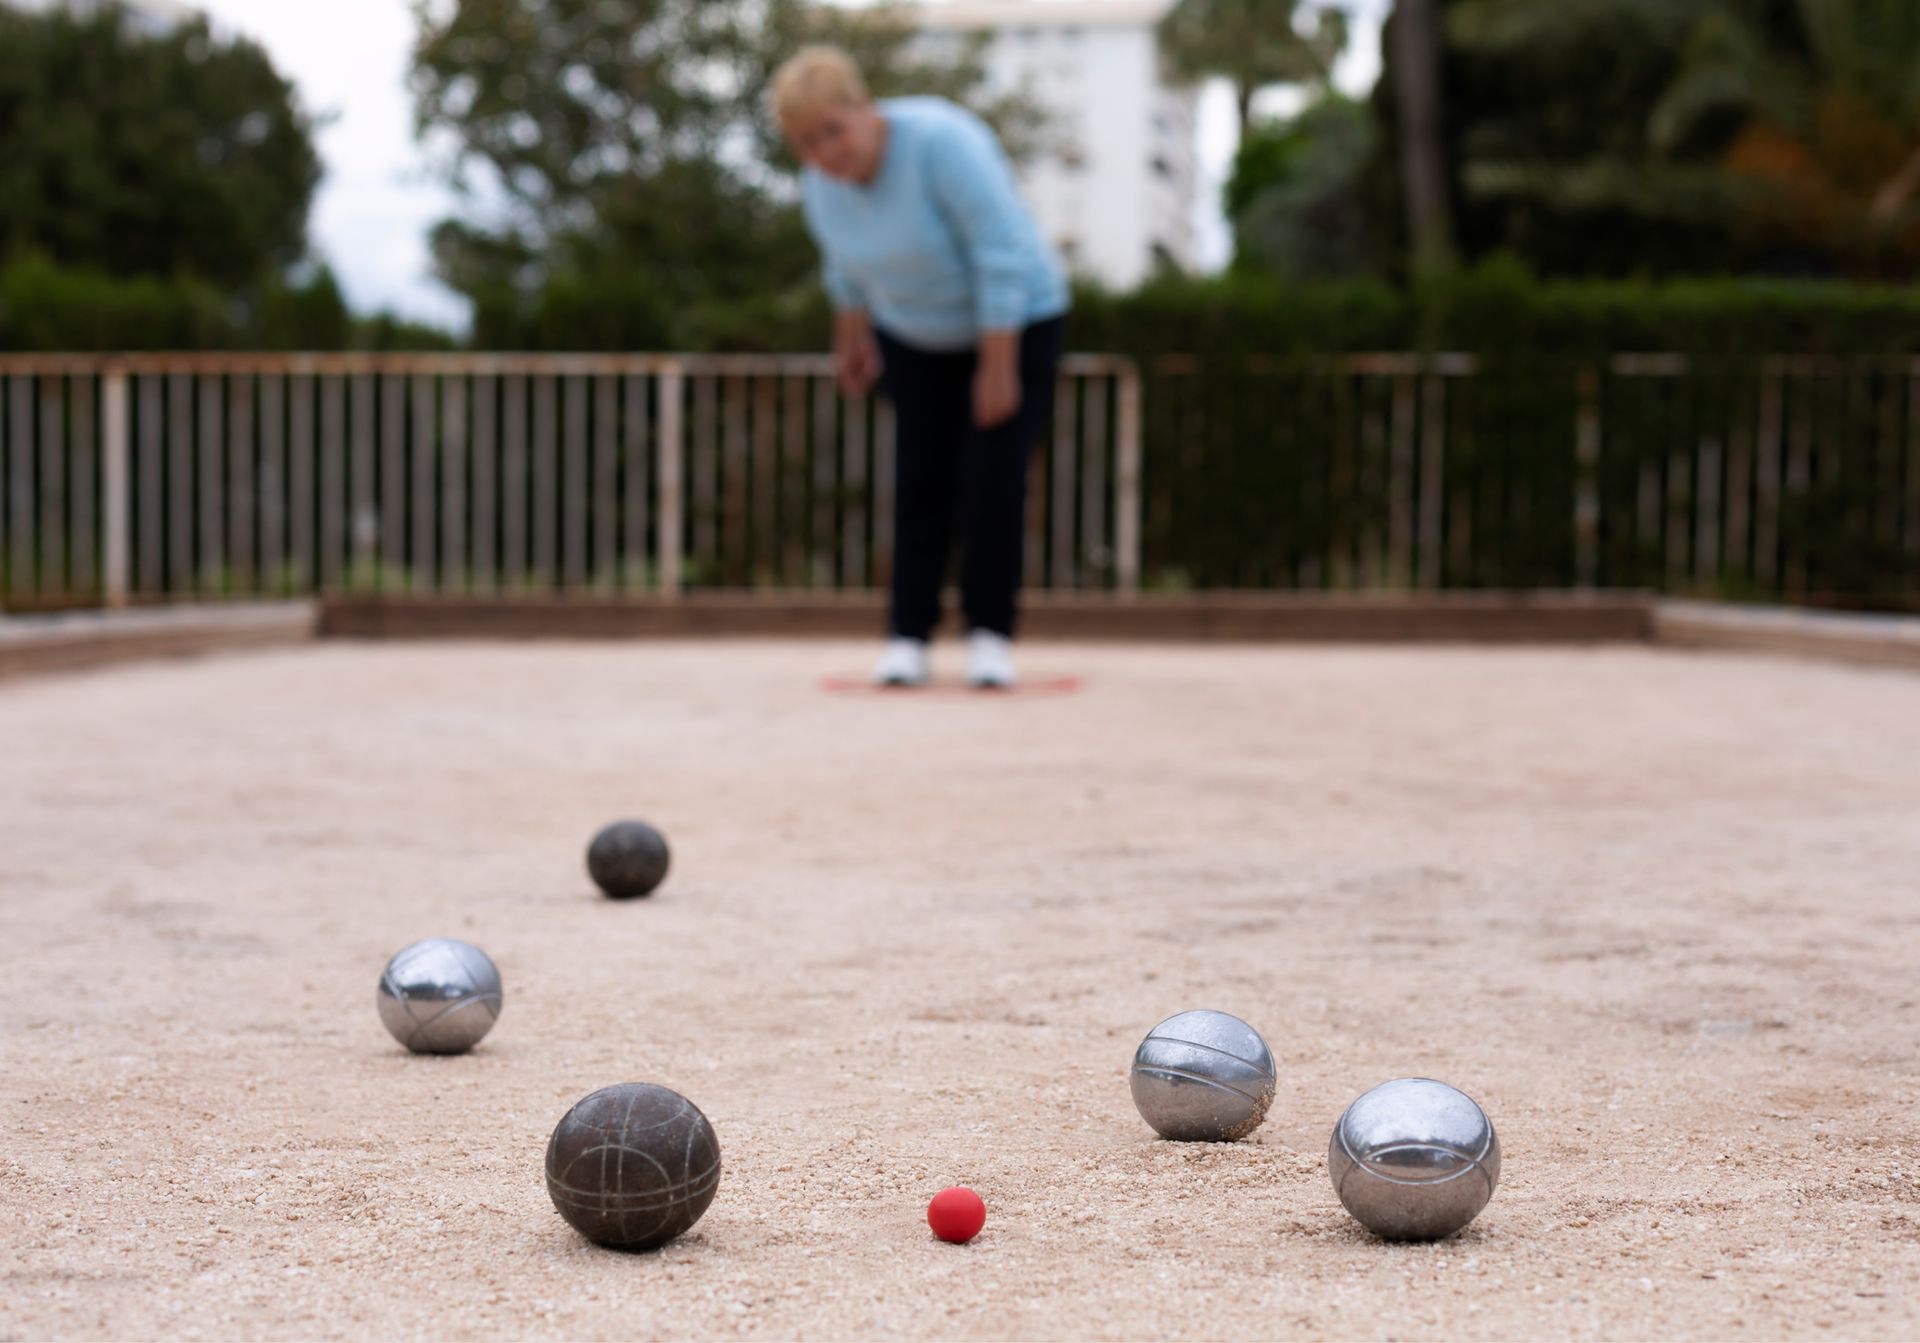 A woman is playing a game of bocce ball in a park.